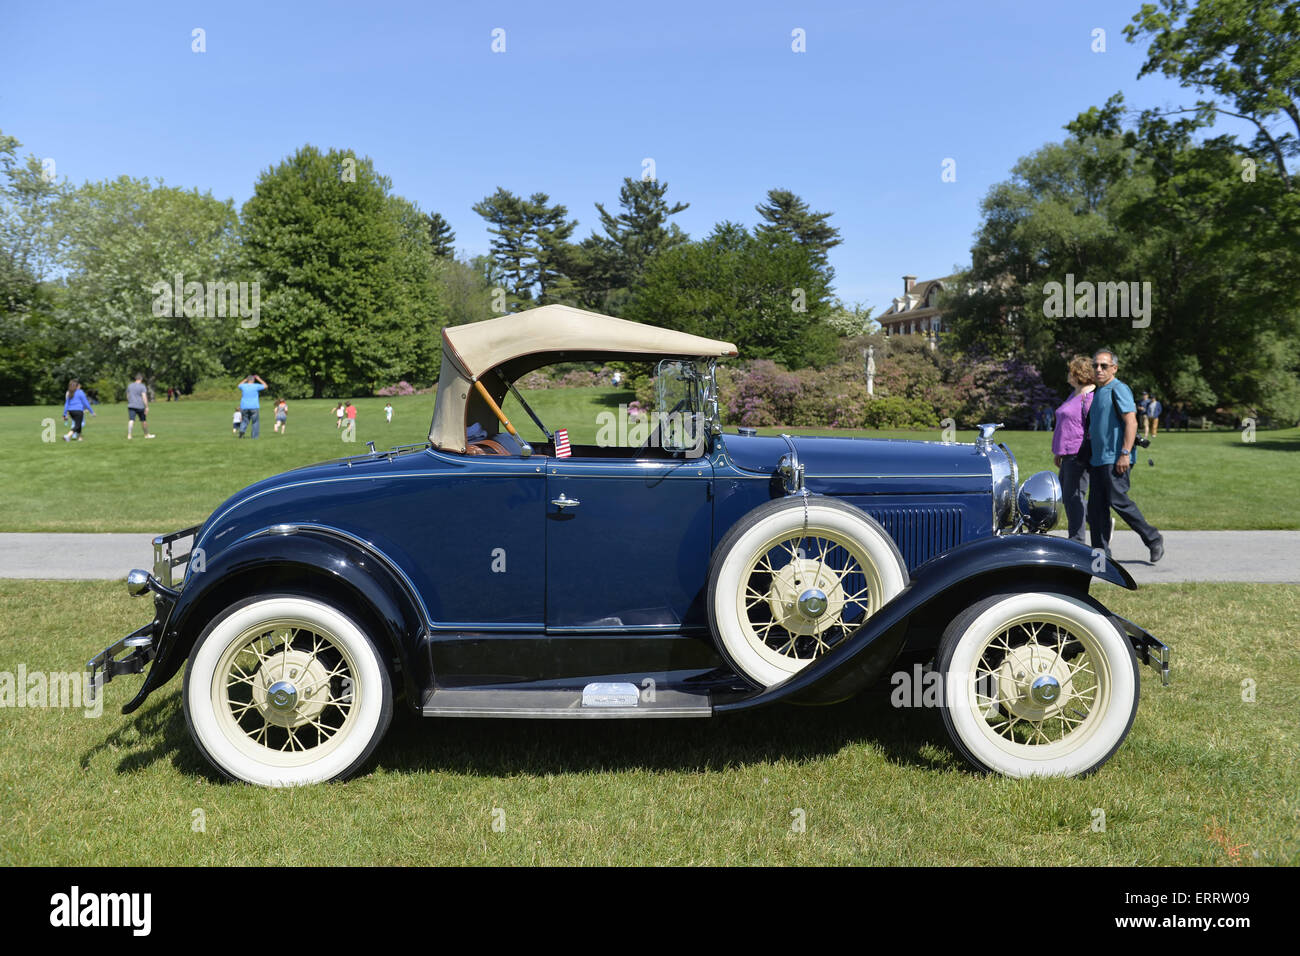 June 7, 2015 - Old Westbury, New York, United States - A blue 1931 Ford Model A roadster with white wall tires, owned by Roger F. Clark of King Park, is shown at the 50th Annual Spring Meet Car Show sponsored by Greater New York Region Antique Automobile Club of America. Over 1,000 antique, classic, and custom cars participated at the popular Long Island vintage car show held at historic Old Westbury Gardens. (Credit Image: © Ann Parry/ZUMA Wire) Stock Photo